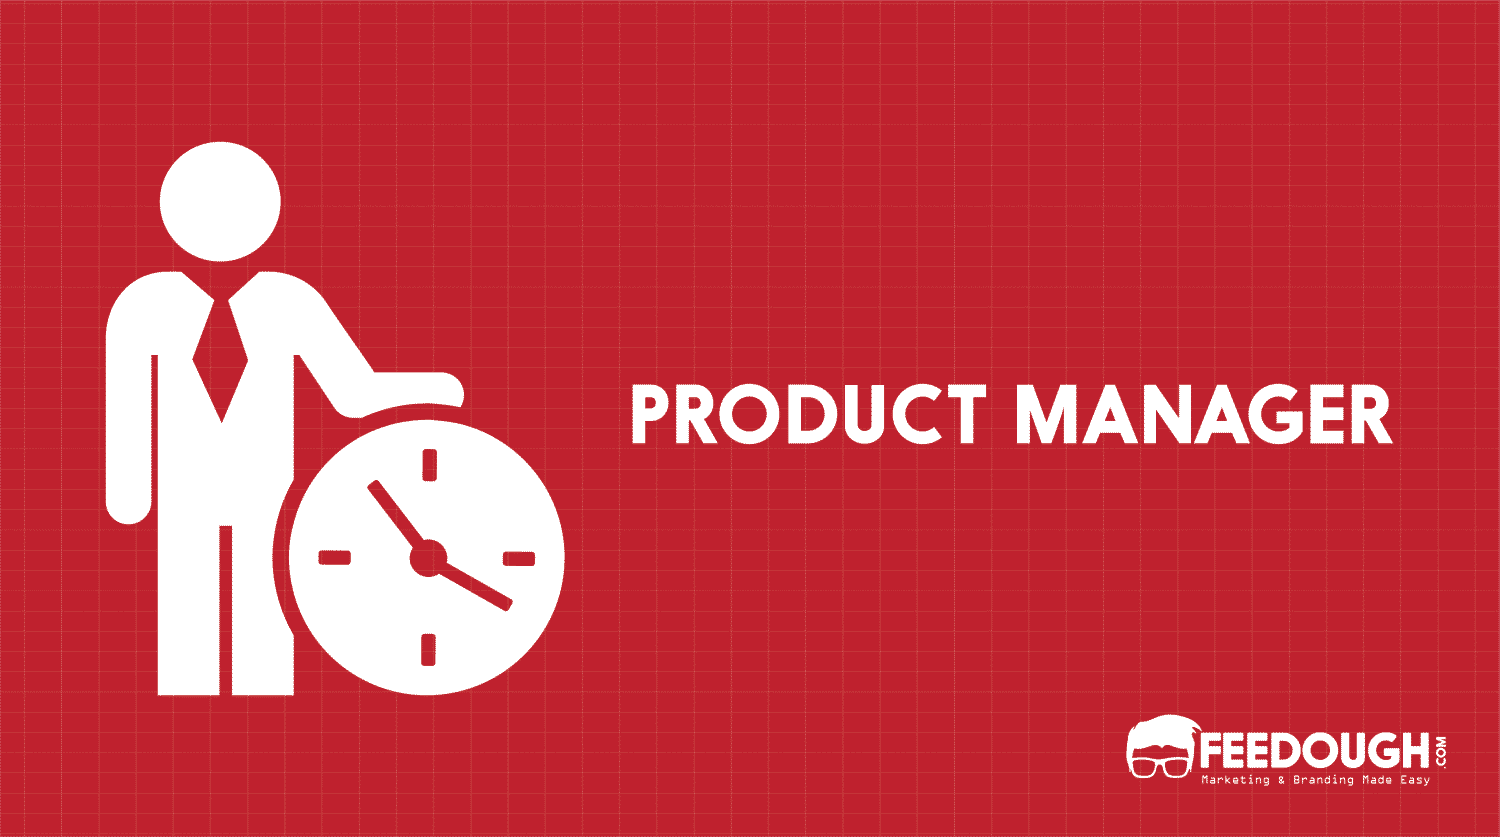 What Is A Product Manager?